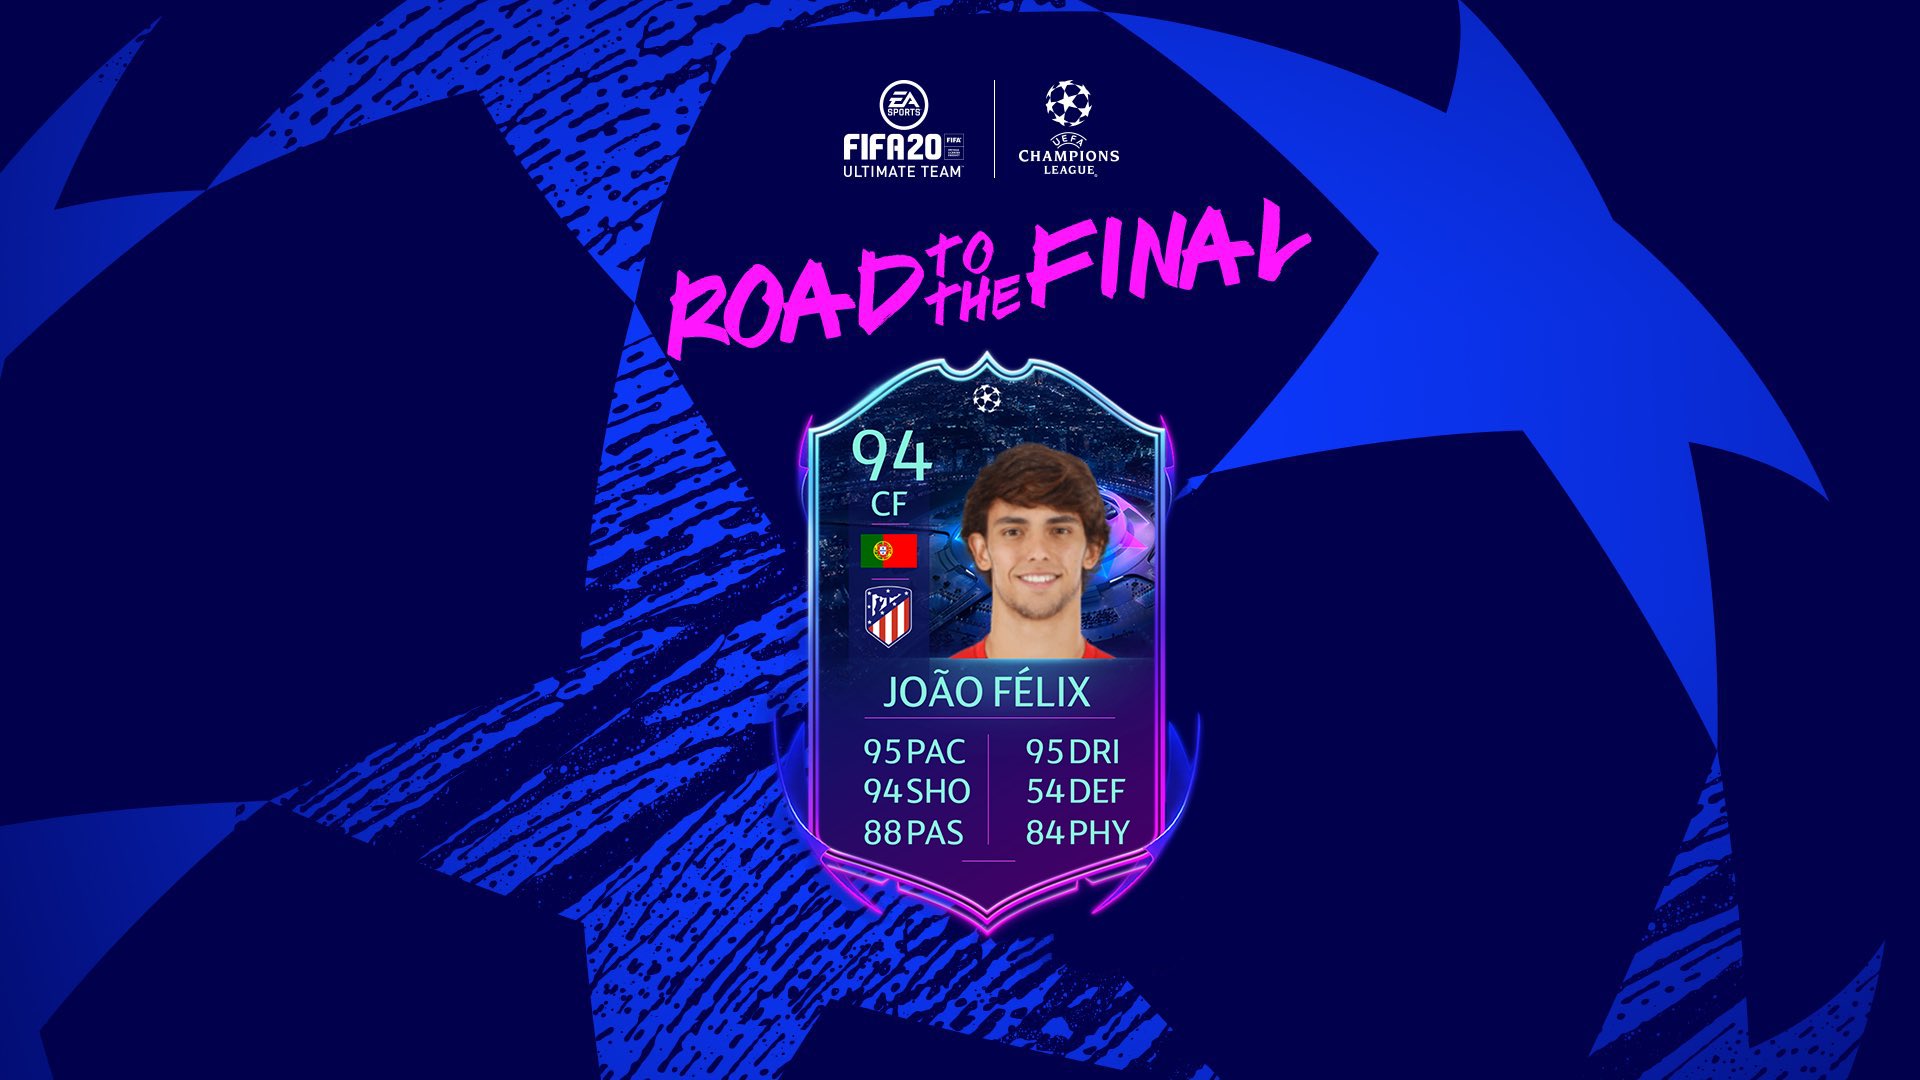 Helmar Designs 🌷 on Twitter: "Petr Cech is a FIFA 21 Icon! 🇨🇿 Meanwhile  in FIFA 20, a UCL RTTF Joao Felix SBC has been released 🇵🇹  https://t.co/HwOvYBRRyY" / Twitter